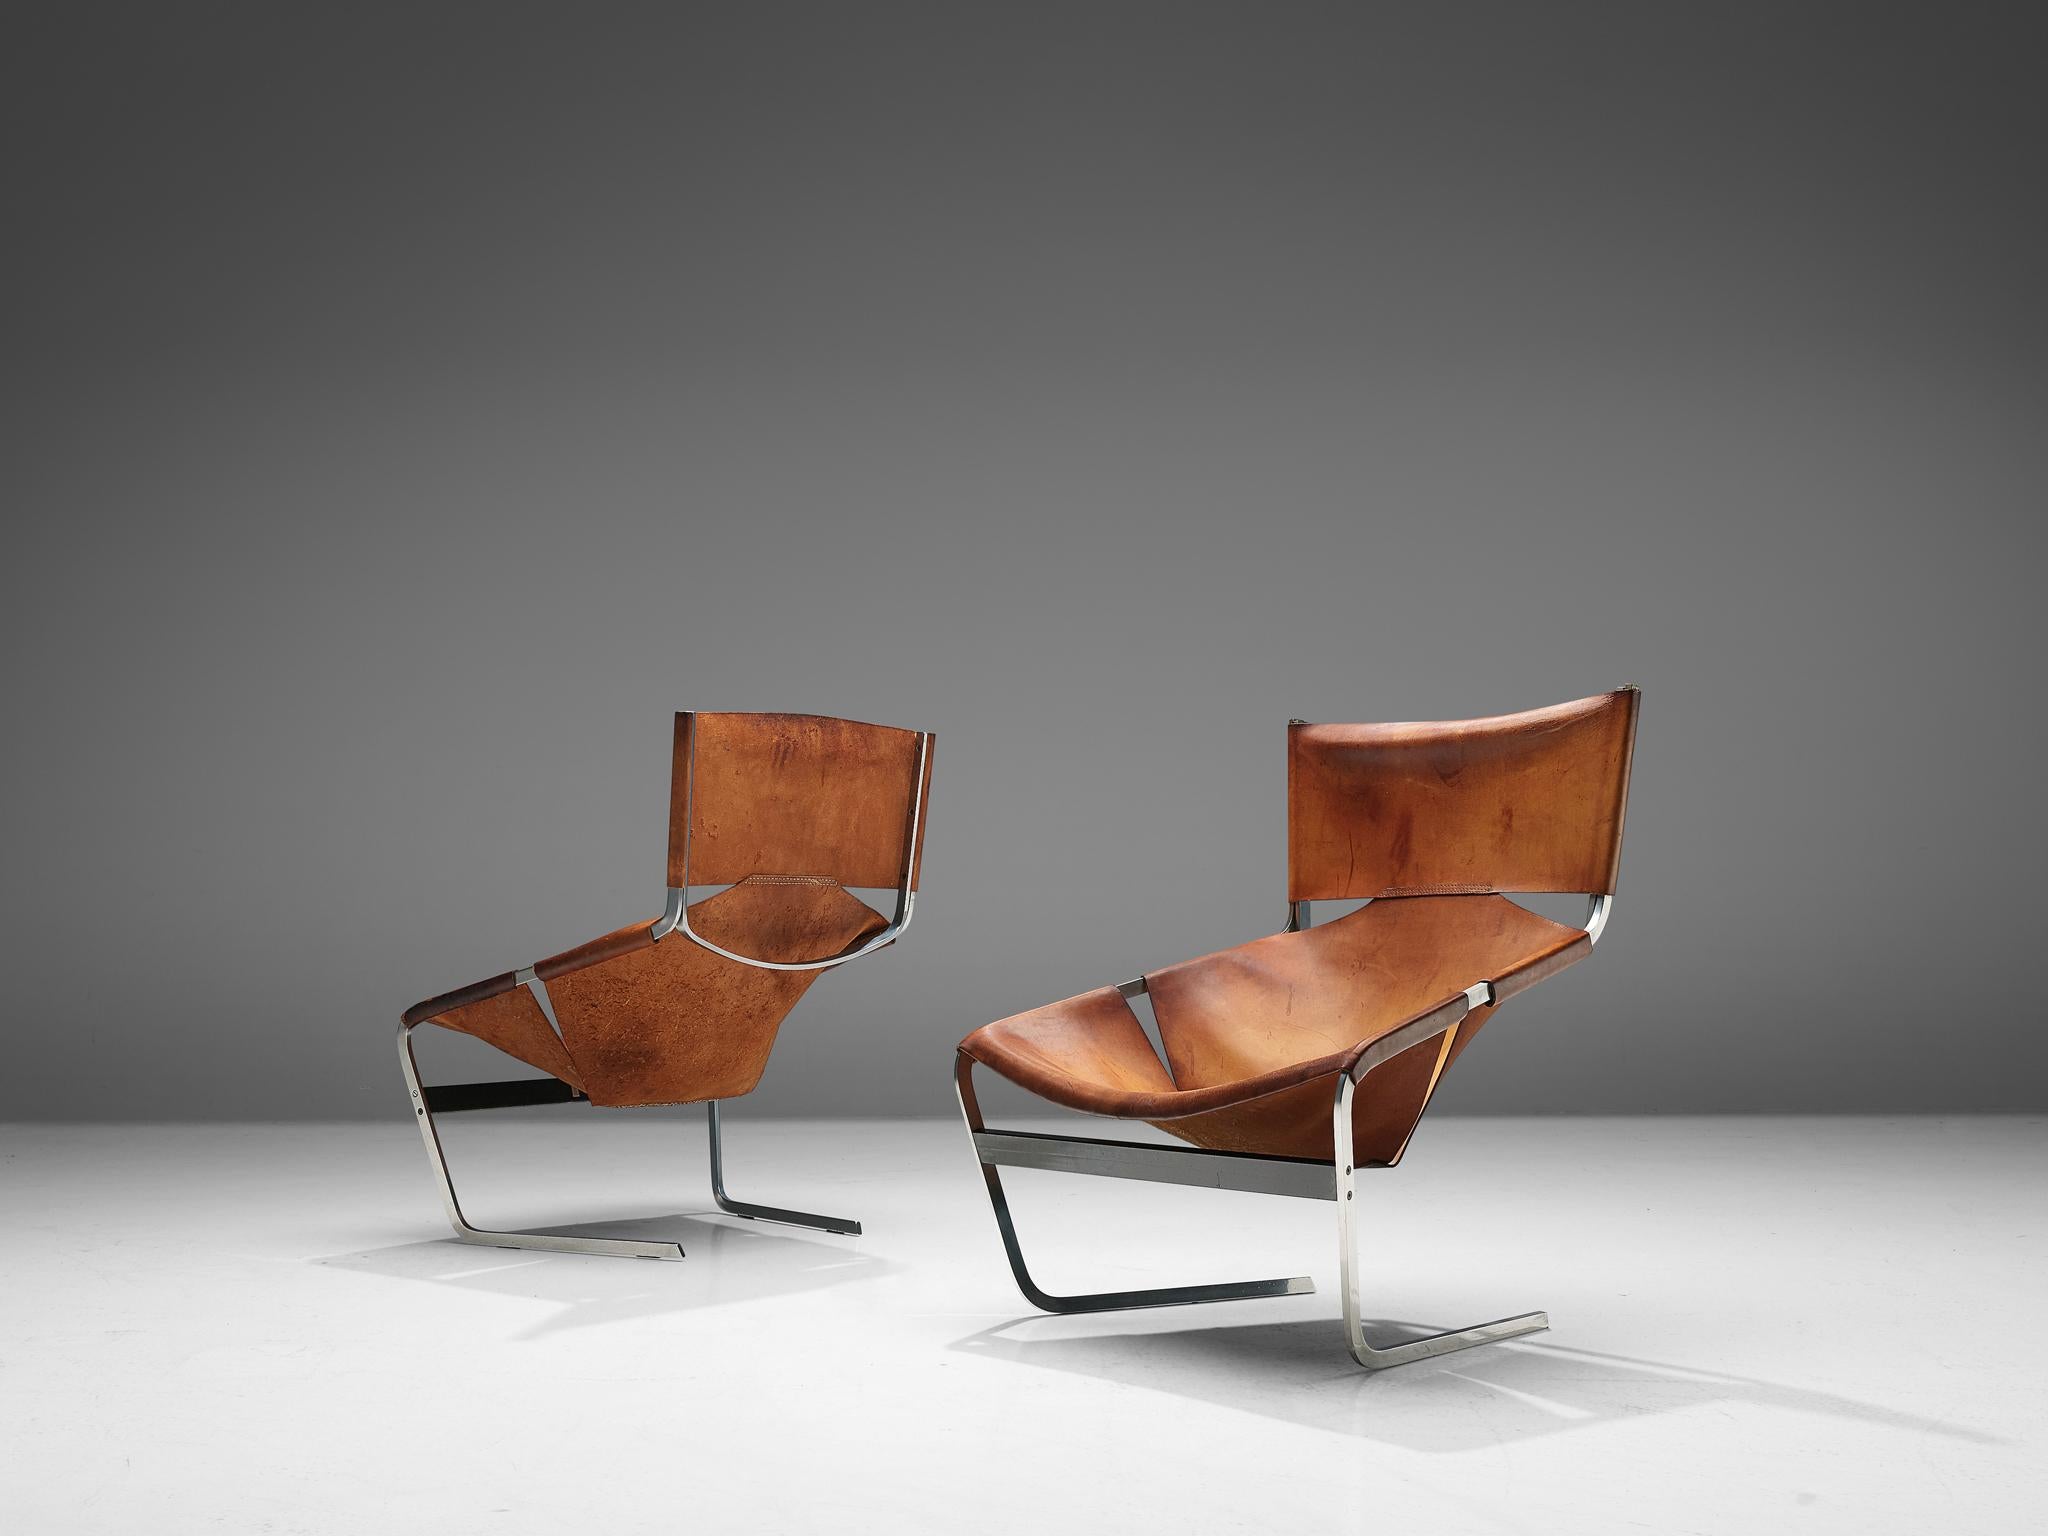 Pierre Paulin for Artifort, F-444 easy chair, metal and cognac leather, the Netherlands, circa 1962.


Cognac leather F-444 lounge chair, designed by Pierre Paulin for Artifort in 1962. The chair shows sharp lines and an angled open seat that